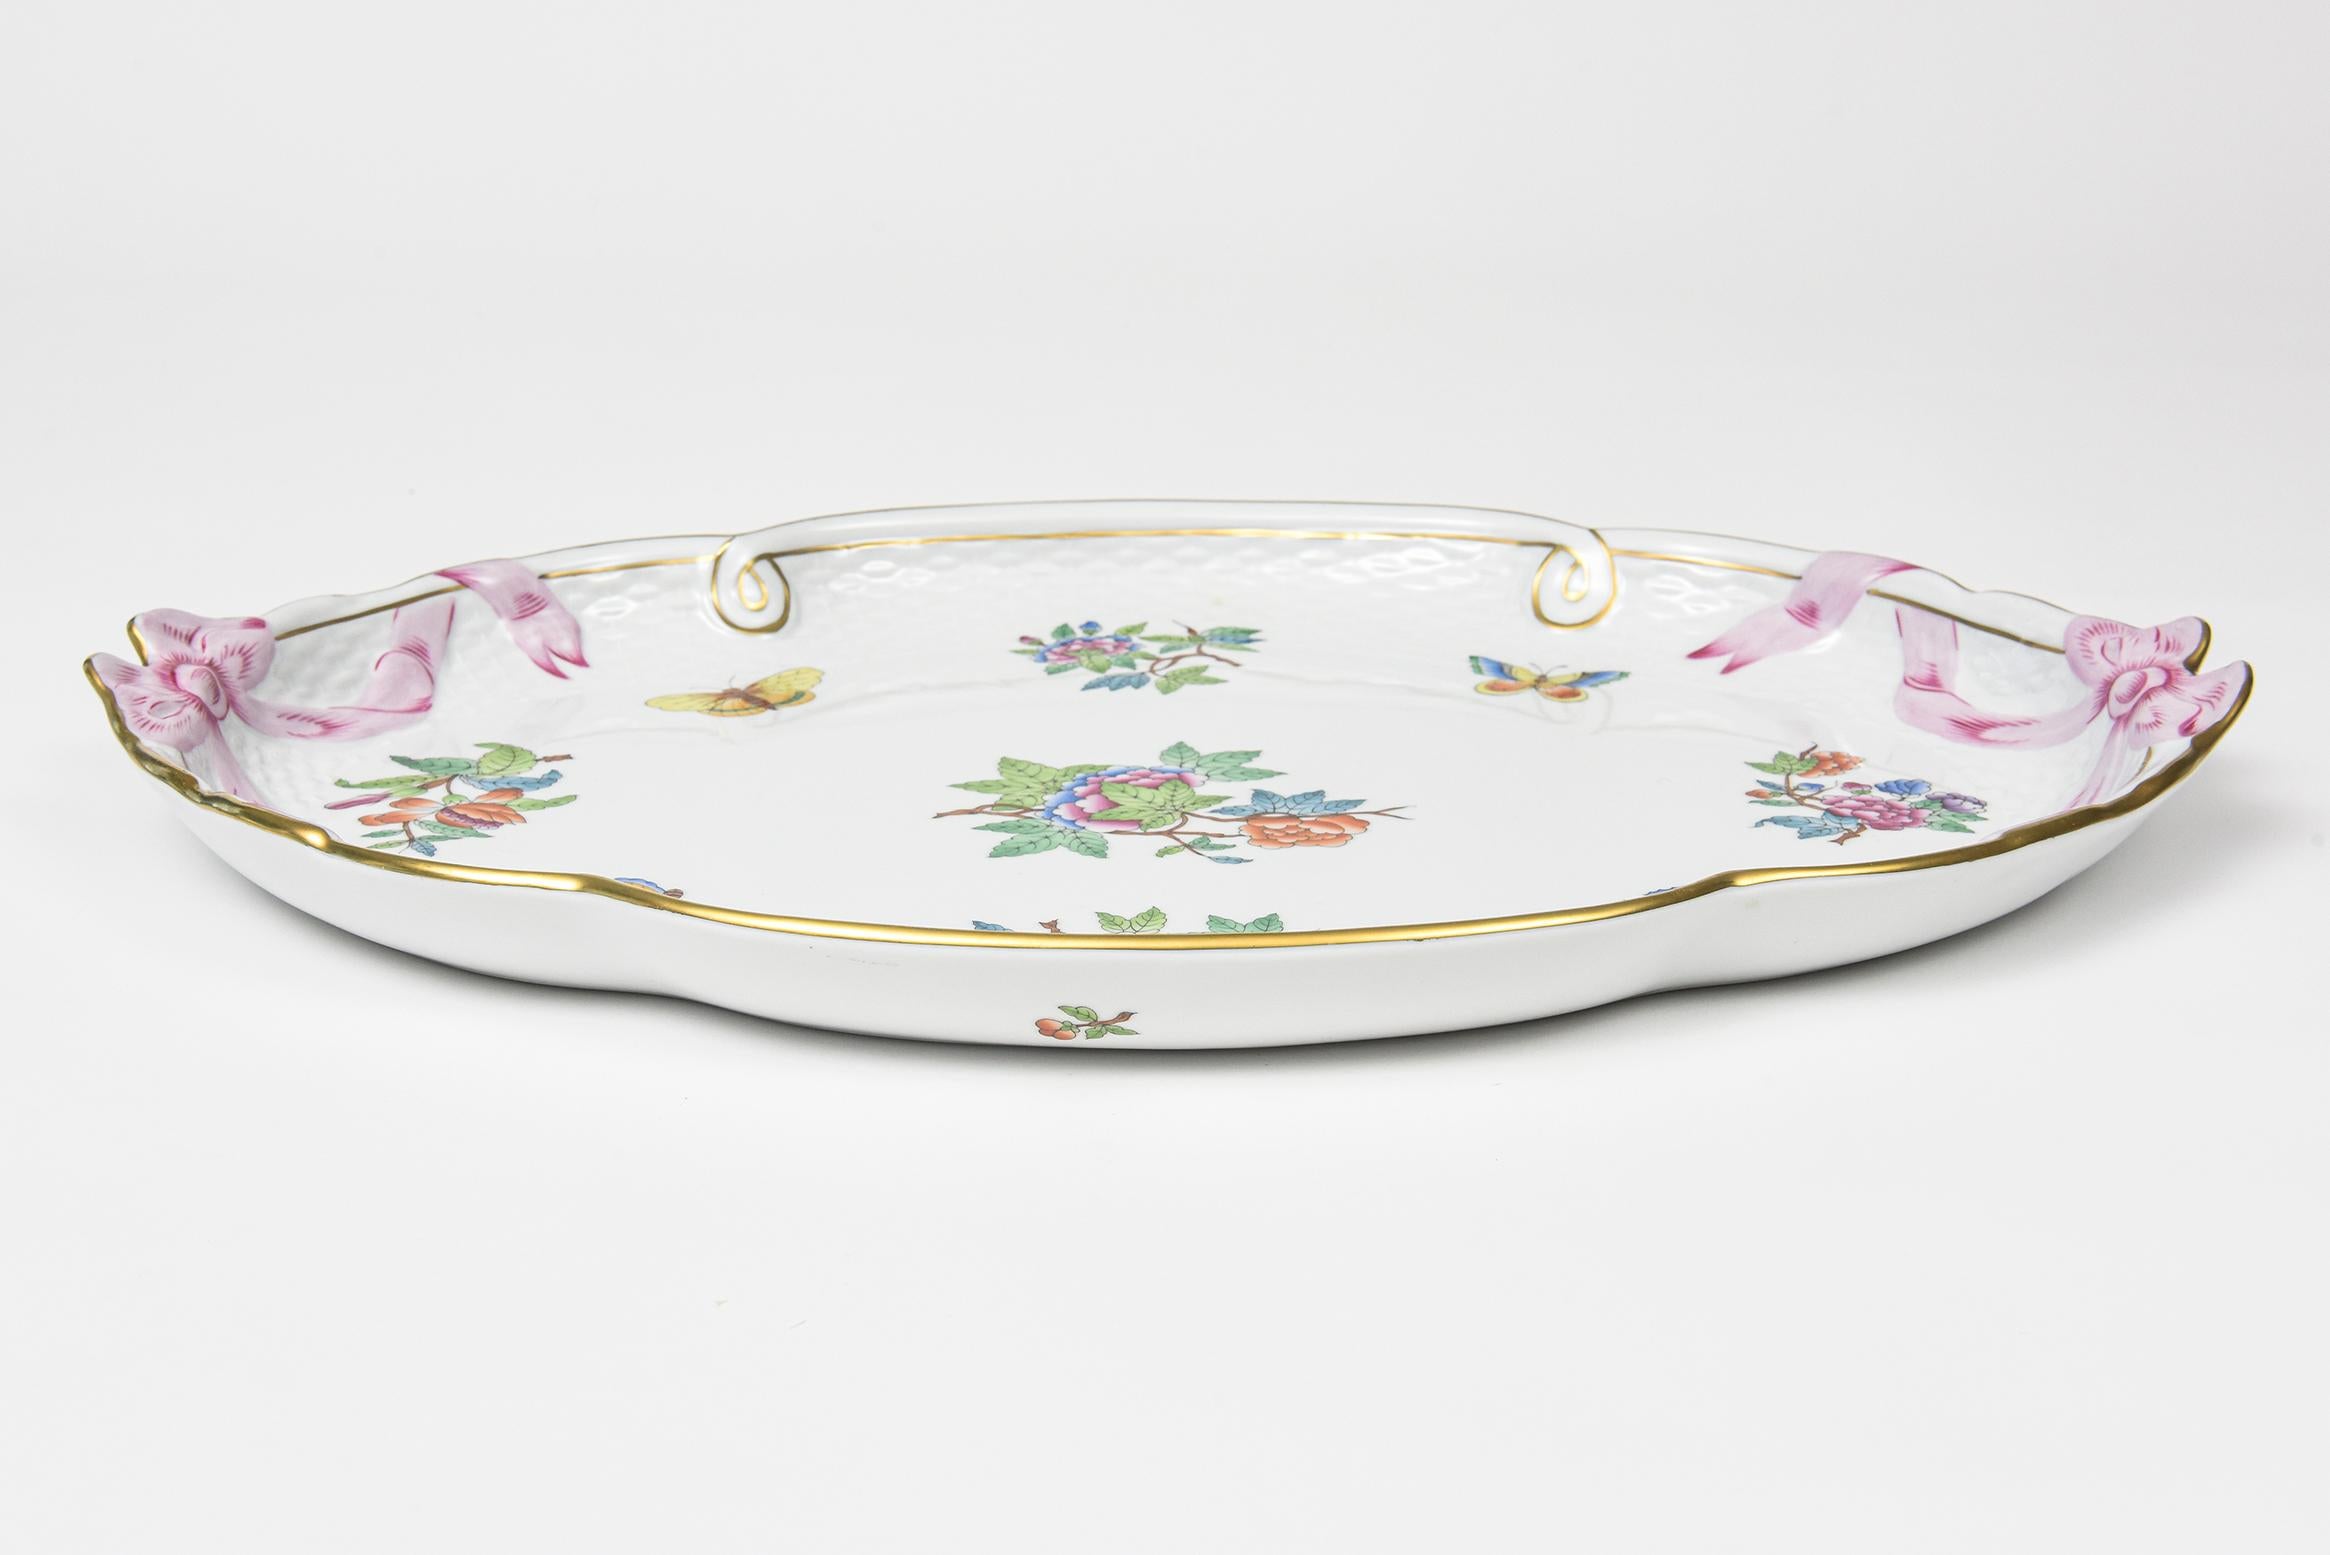 Herend Queen Victoria Older Oval Tray with Bows Flowers and Butterflies For Sale 1